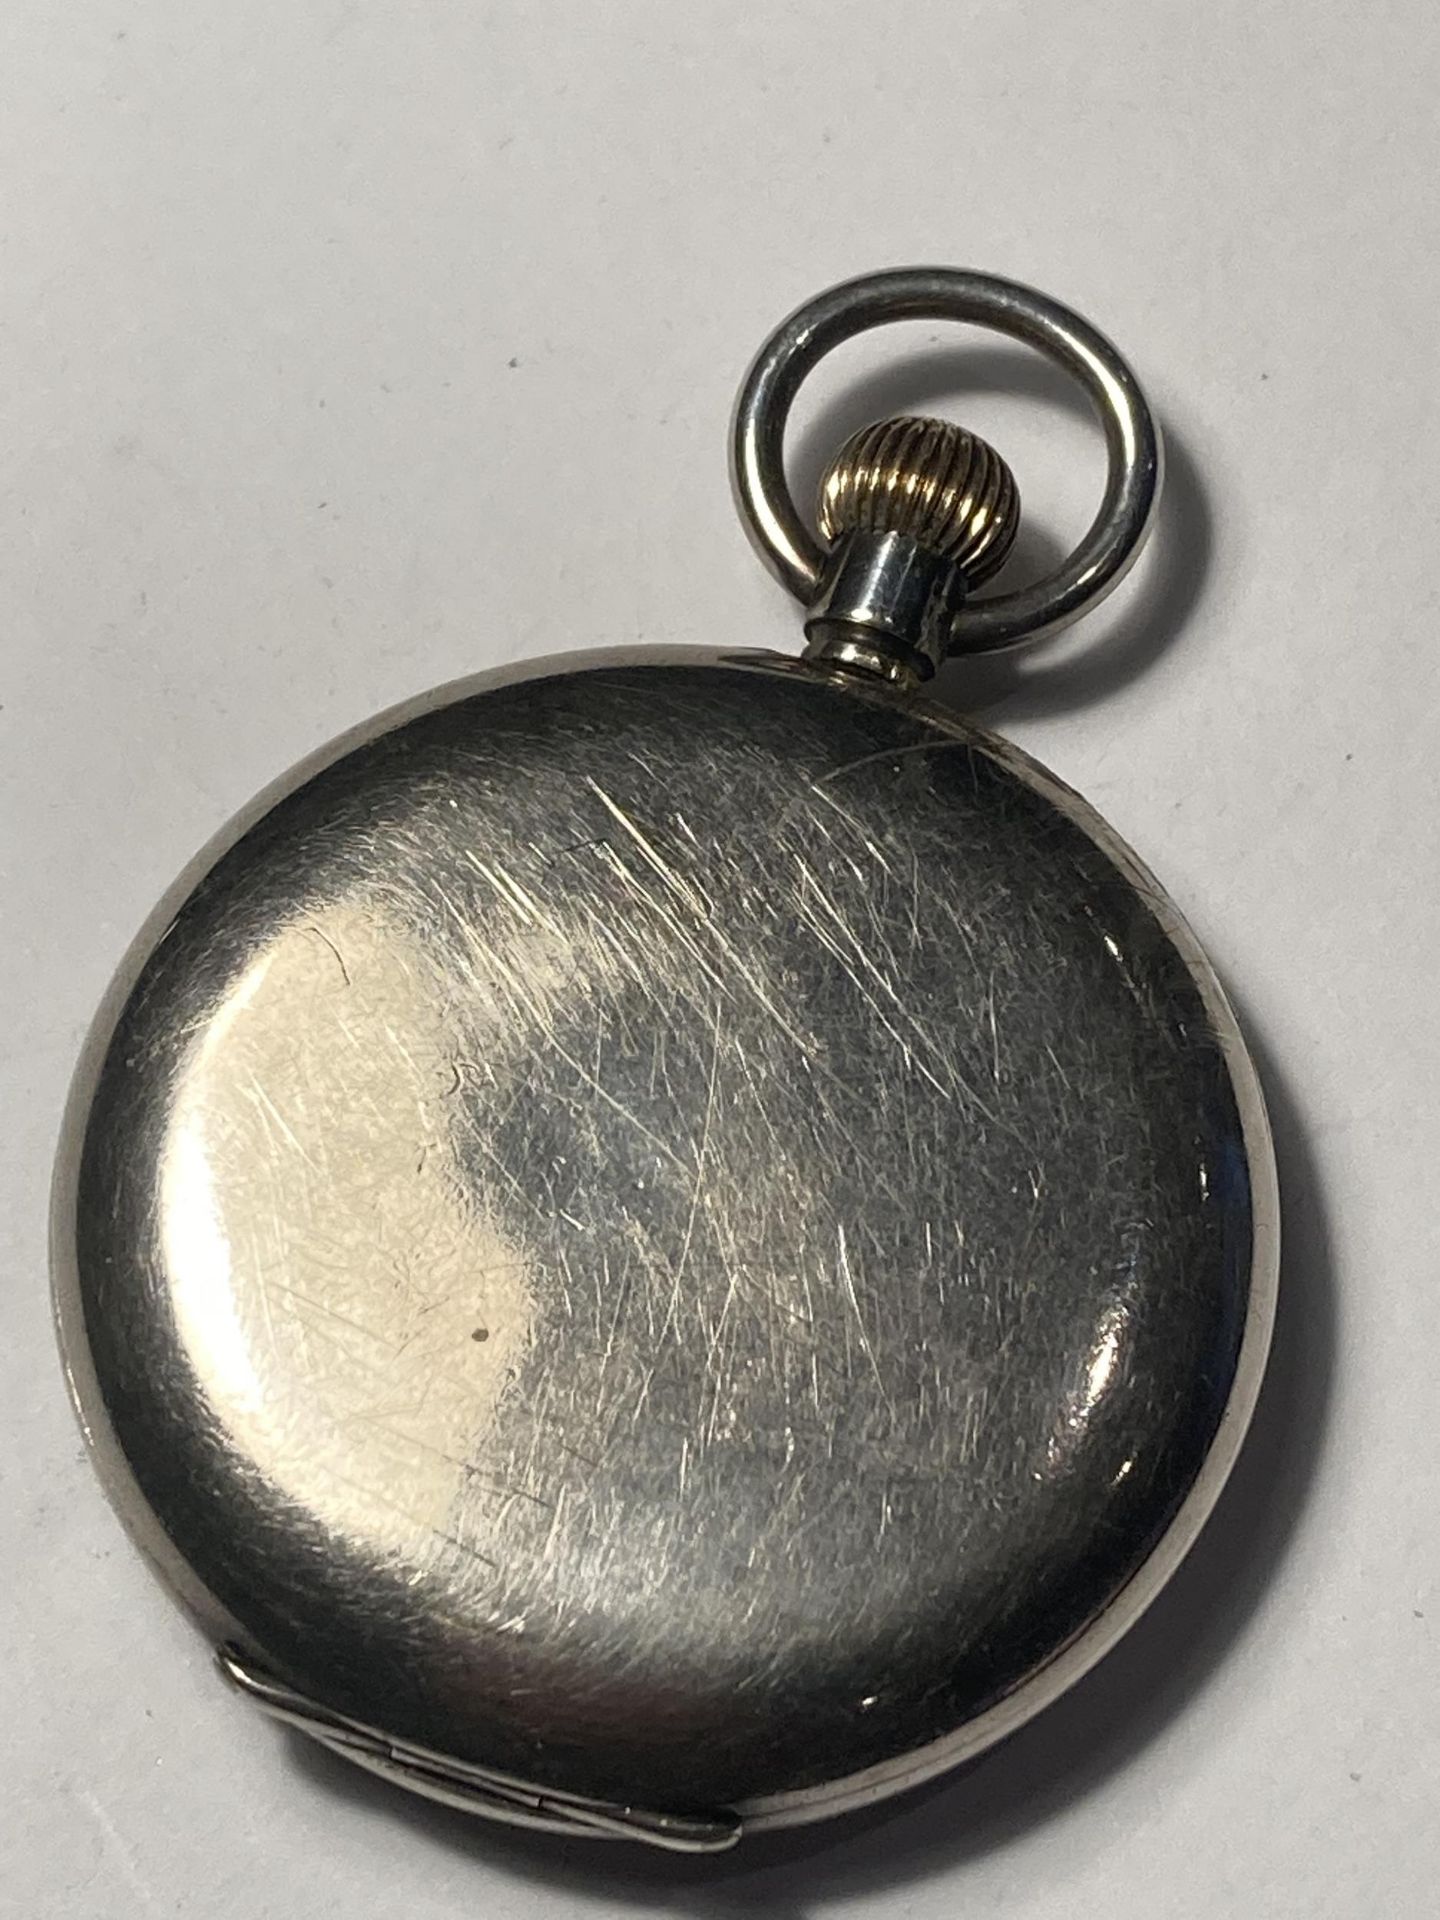 A SILVER POCKET WATCH WITH WHITE ENAMEL FACE SEEN WORKING BUT NO WARRANTY - Image 2 of 2